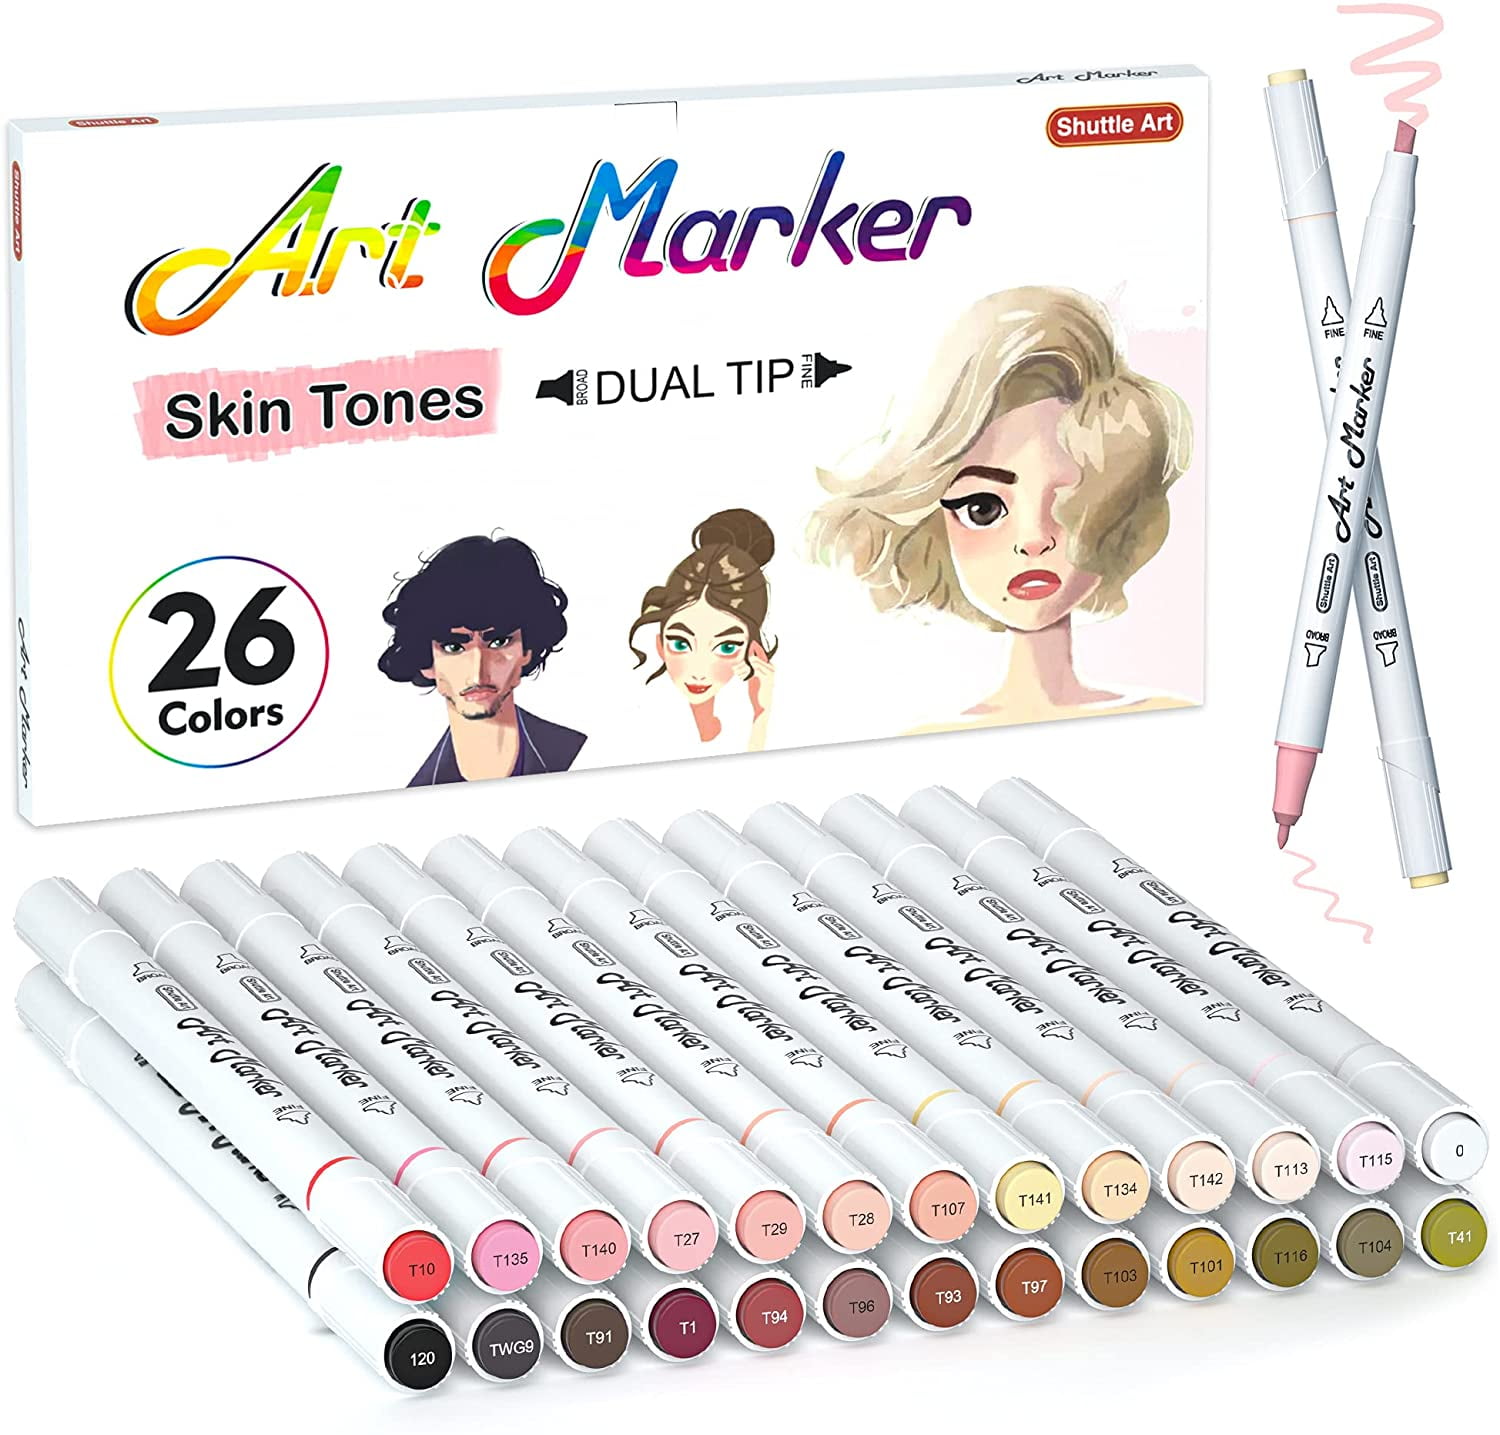 Coloring Your Croquis: Skin Tones, Part 1 - Markers Edition